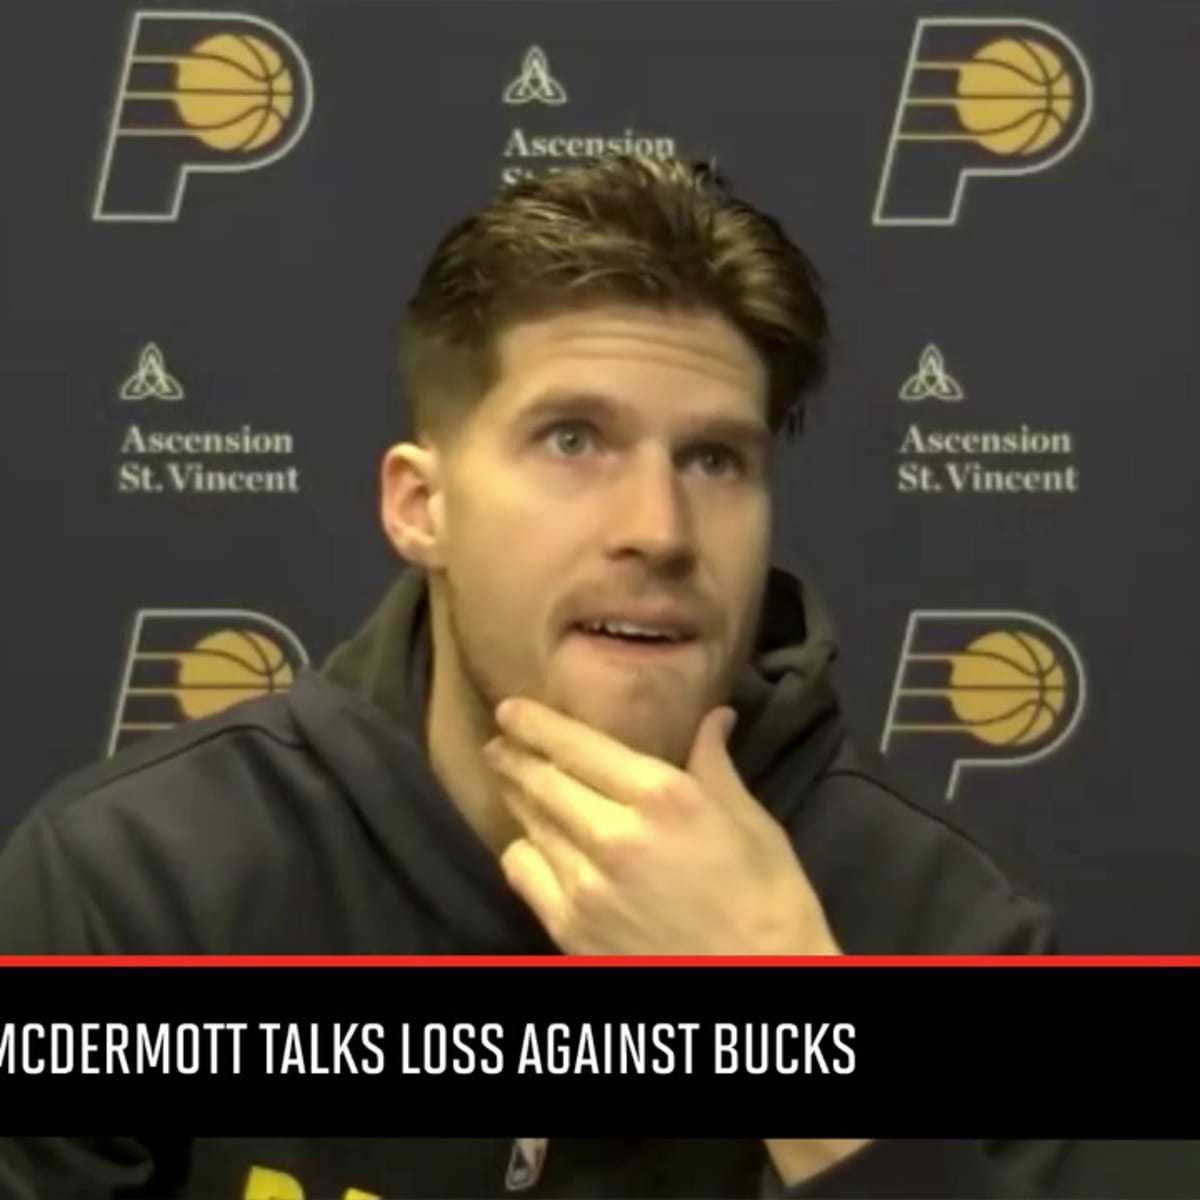 Doug McDermott delivers late-game boost for Pacers with nine-point